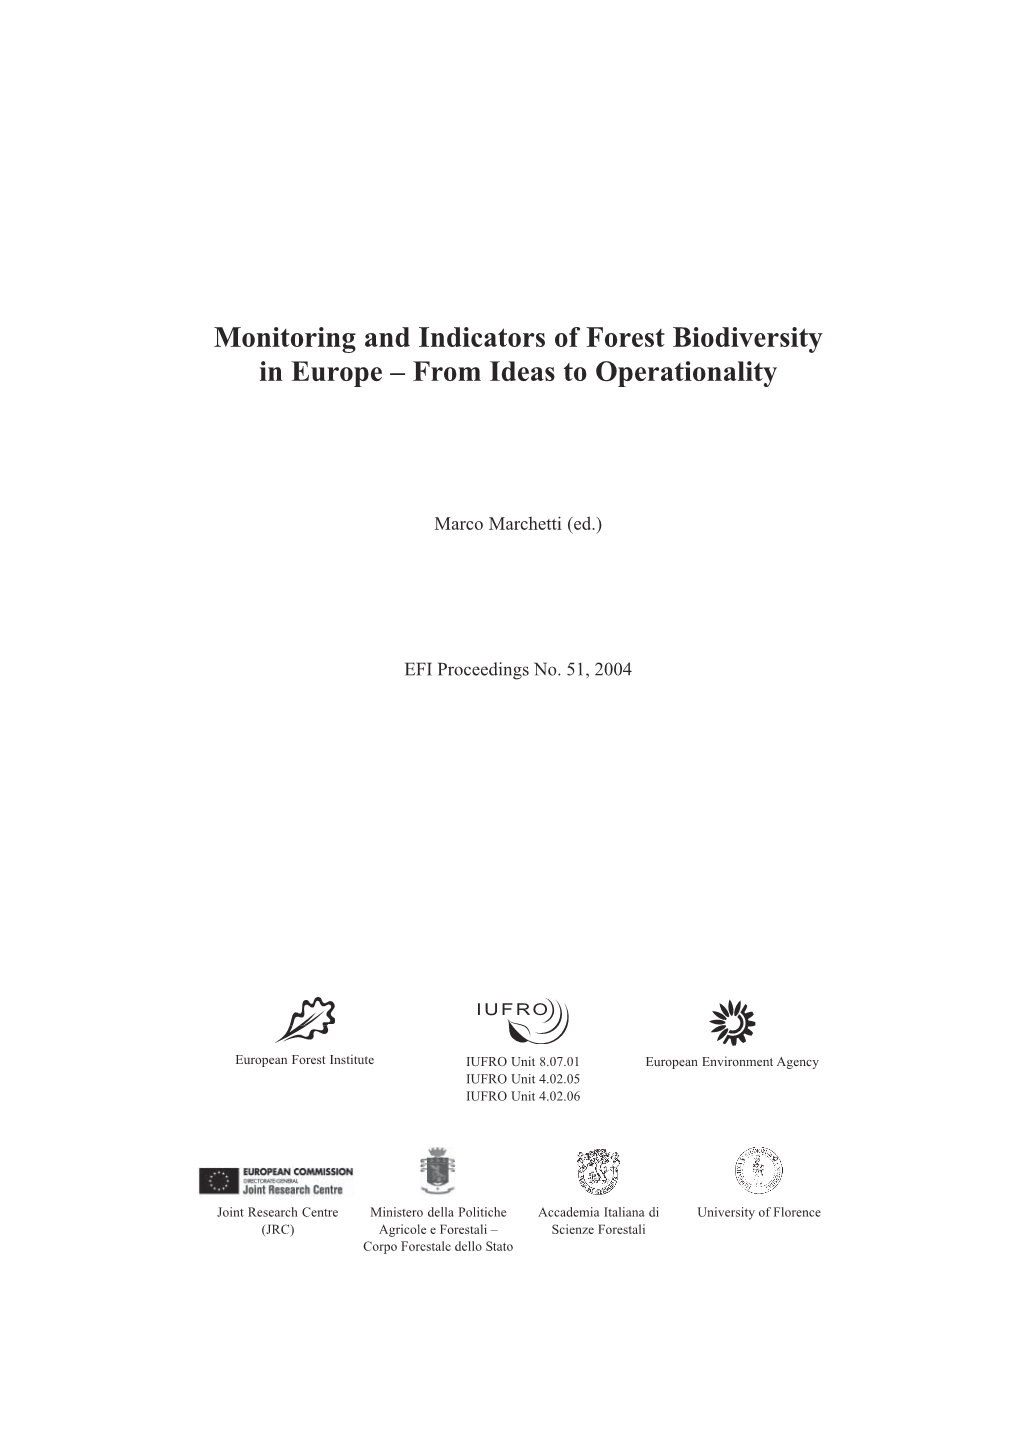 Monitoring and Indicators of Forest Biodiversity in Europe – from Ideas to Operationality